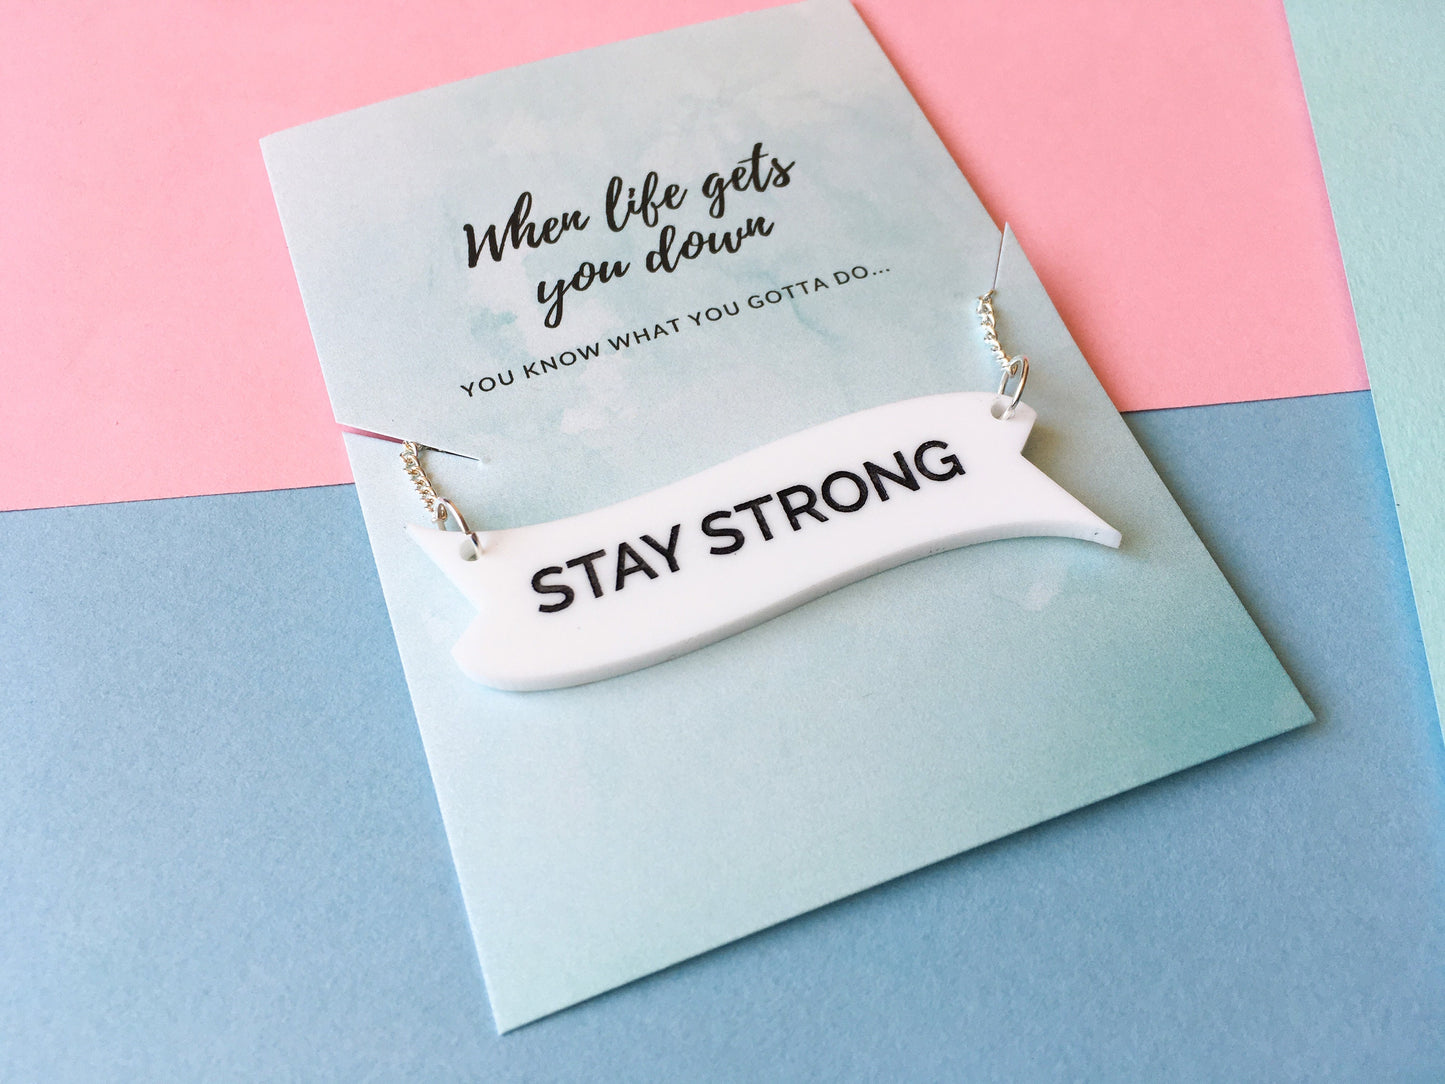 Stay Strong Necklace, Positivity Jewellery